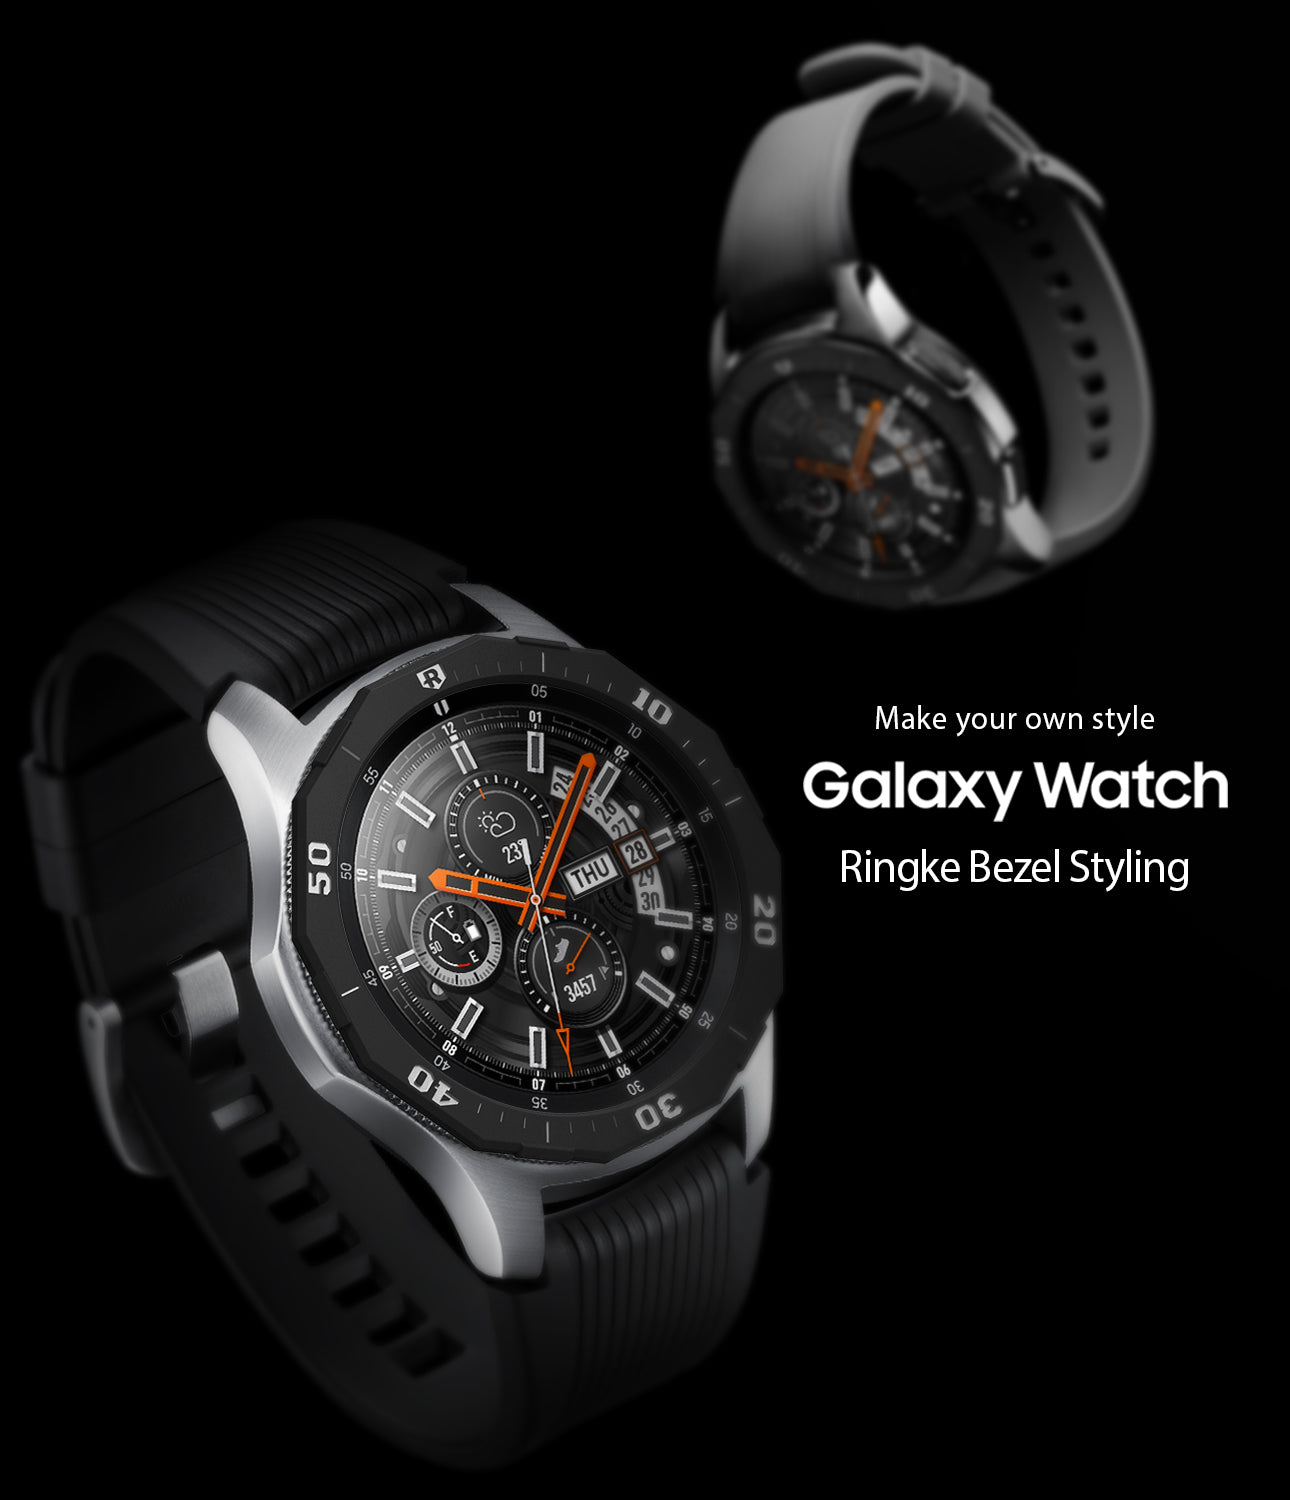 Galaxy Watch 46mm  Metal One Band - Ringke Official Store